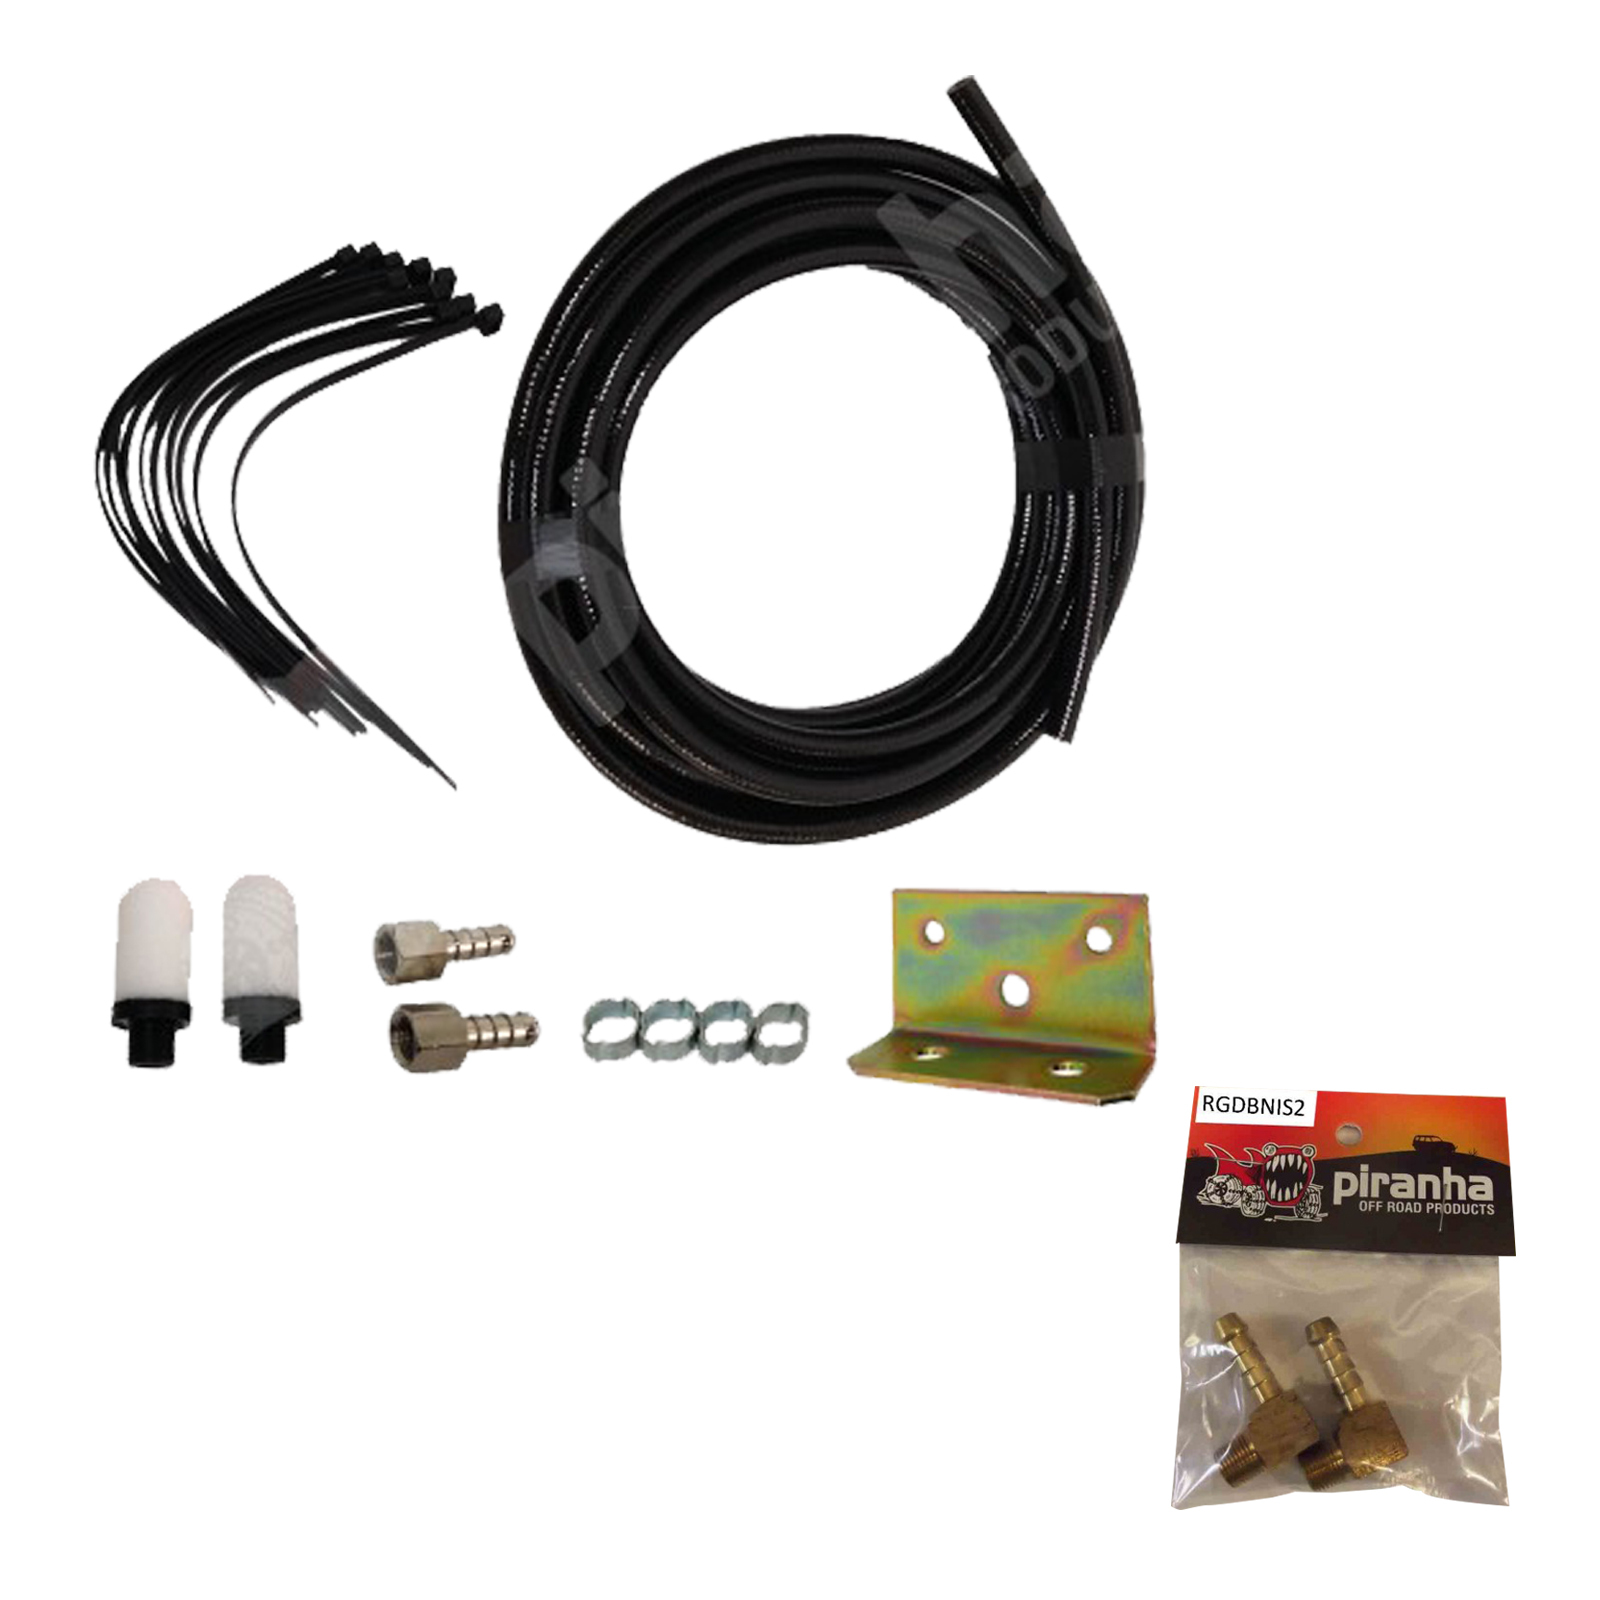 DIFF BREATHER KIT fits most 4x4 without the need of adaptors